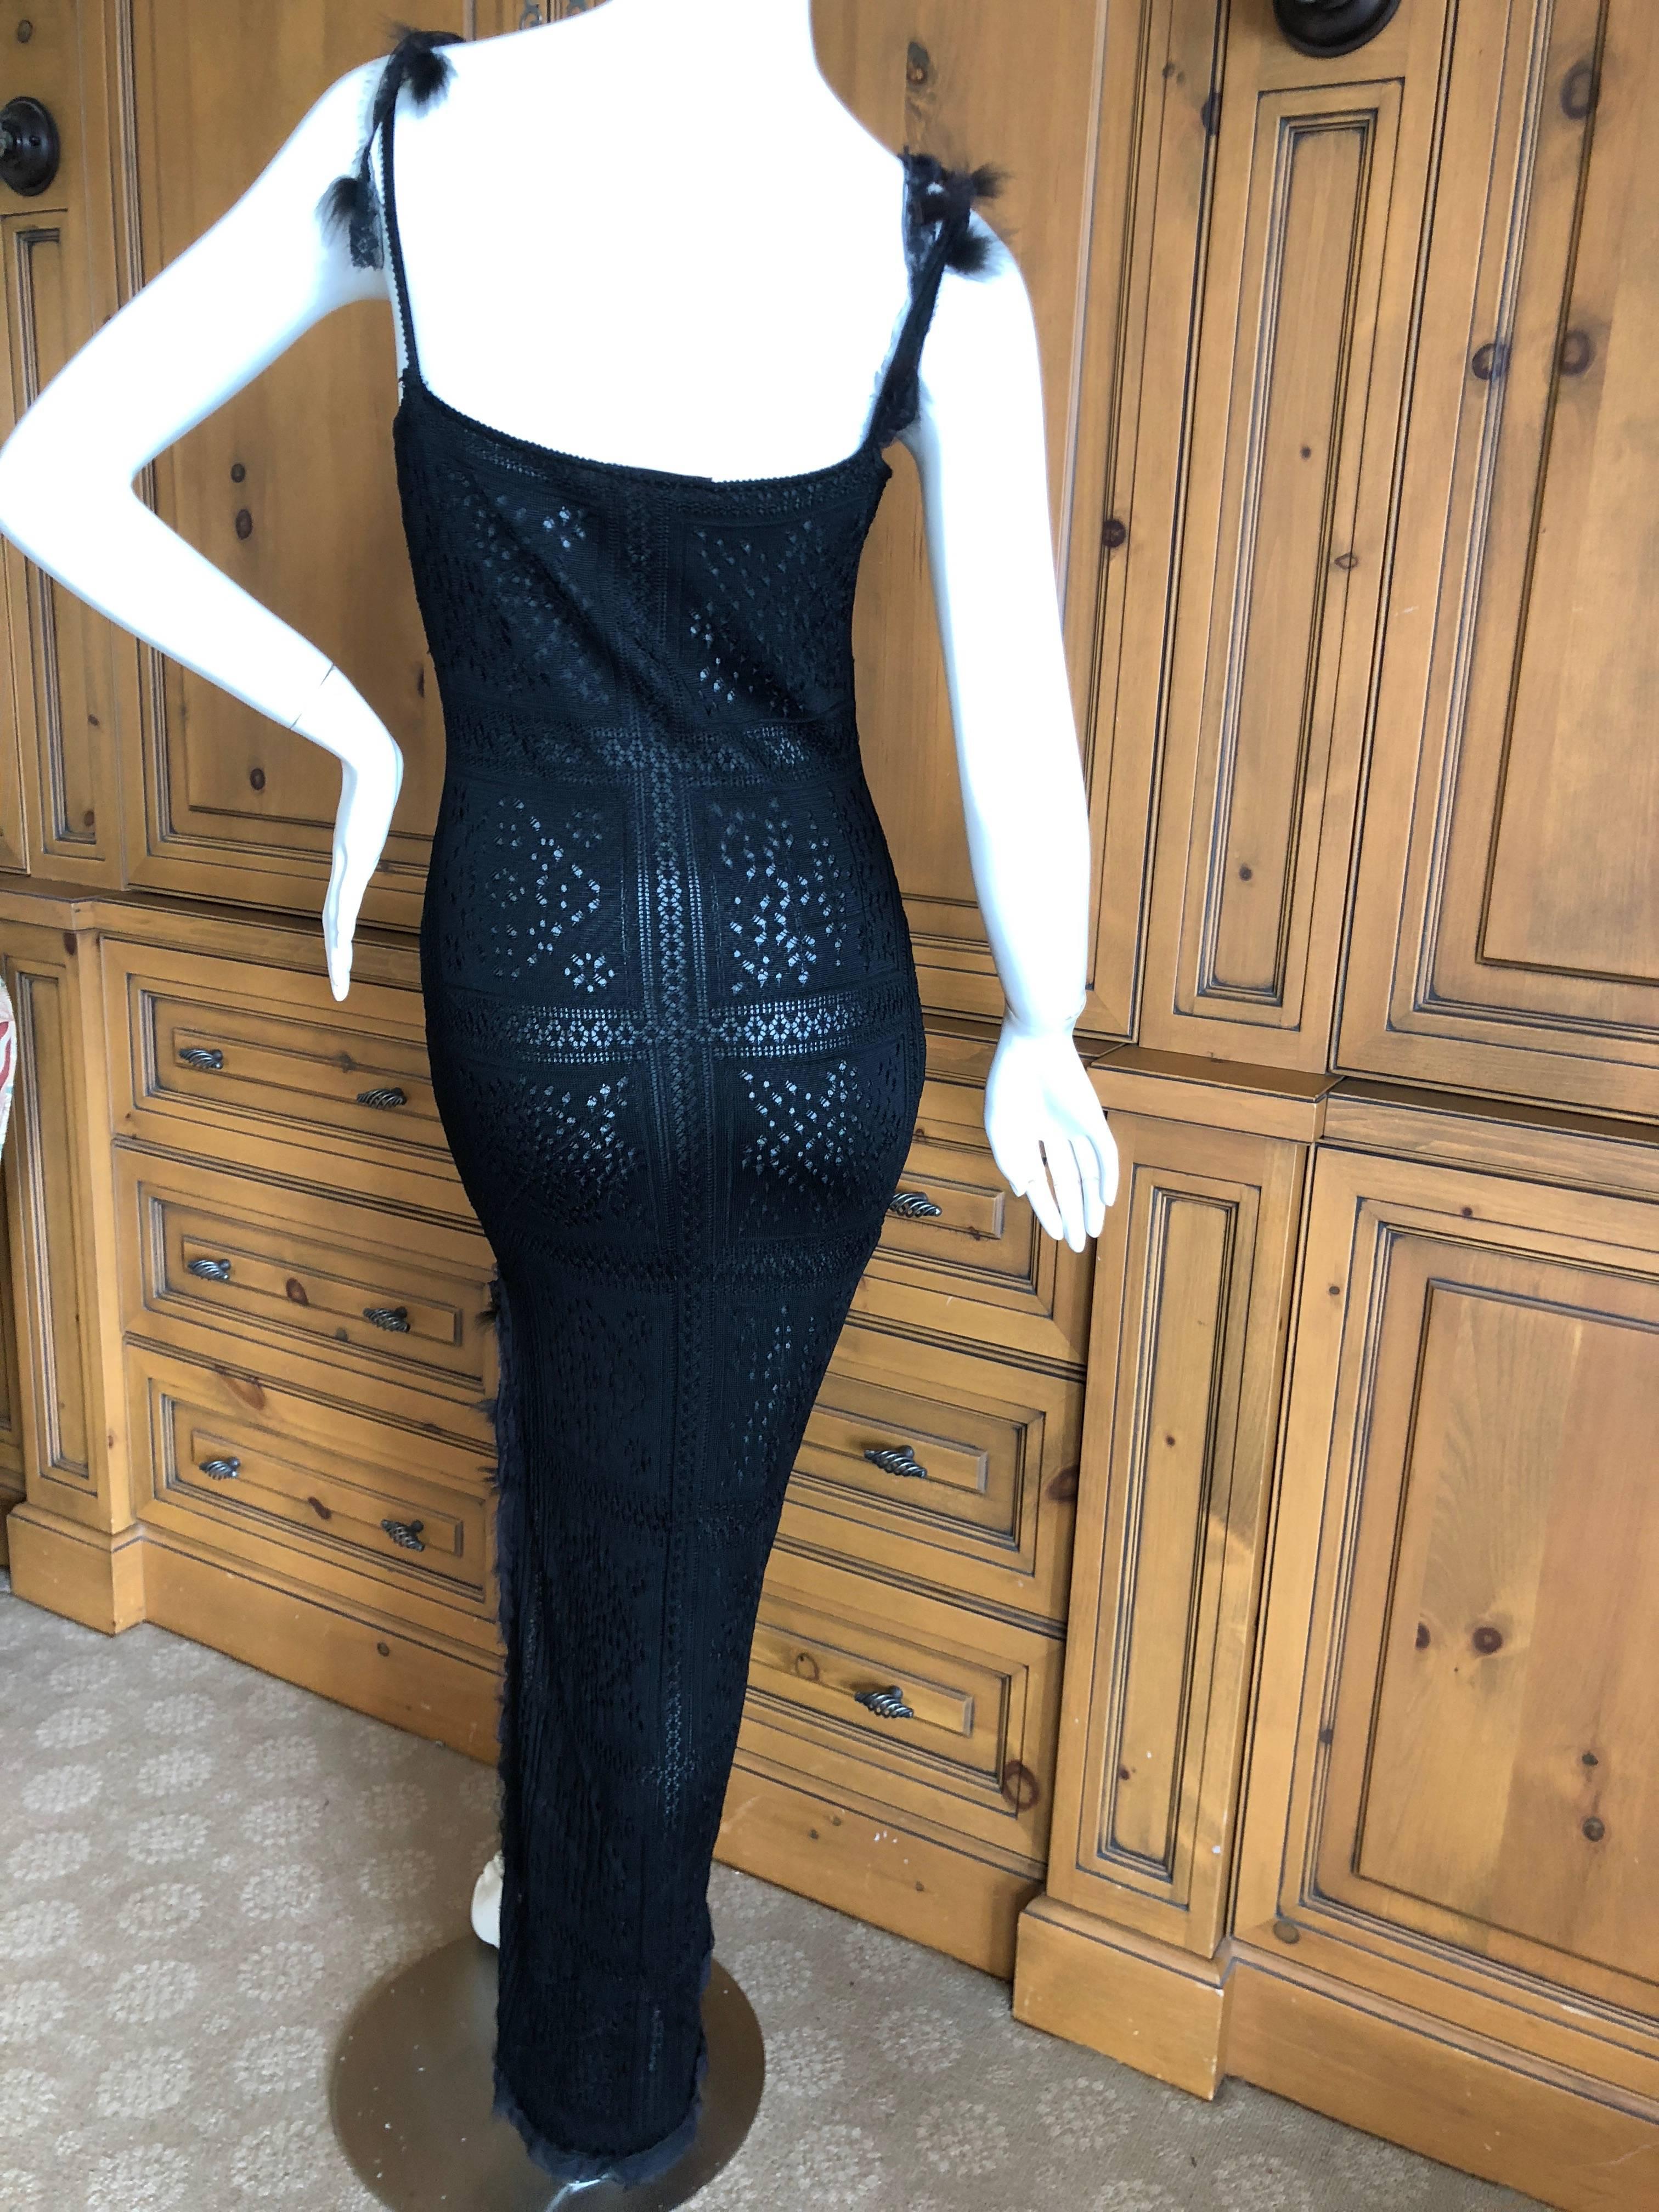 John Galliano Label Sheer Black Knit High Slit Feather Trim Dress, Early 1990s For Sale 3